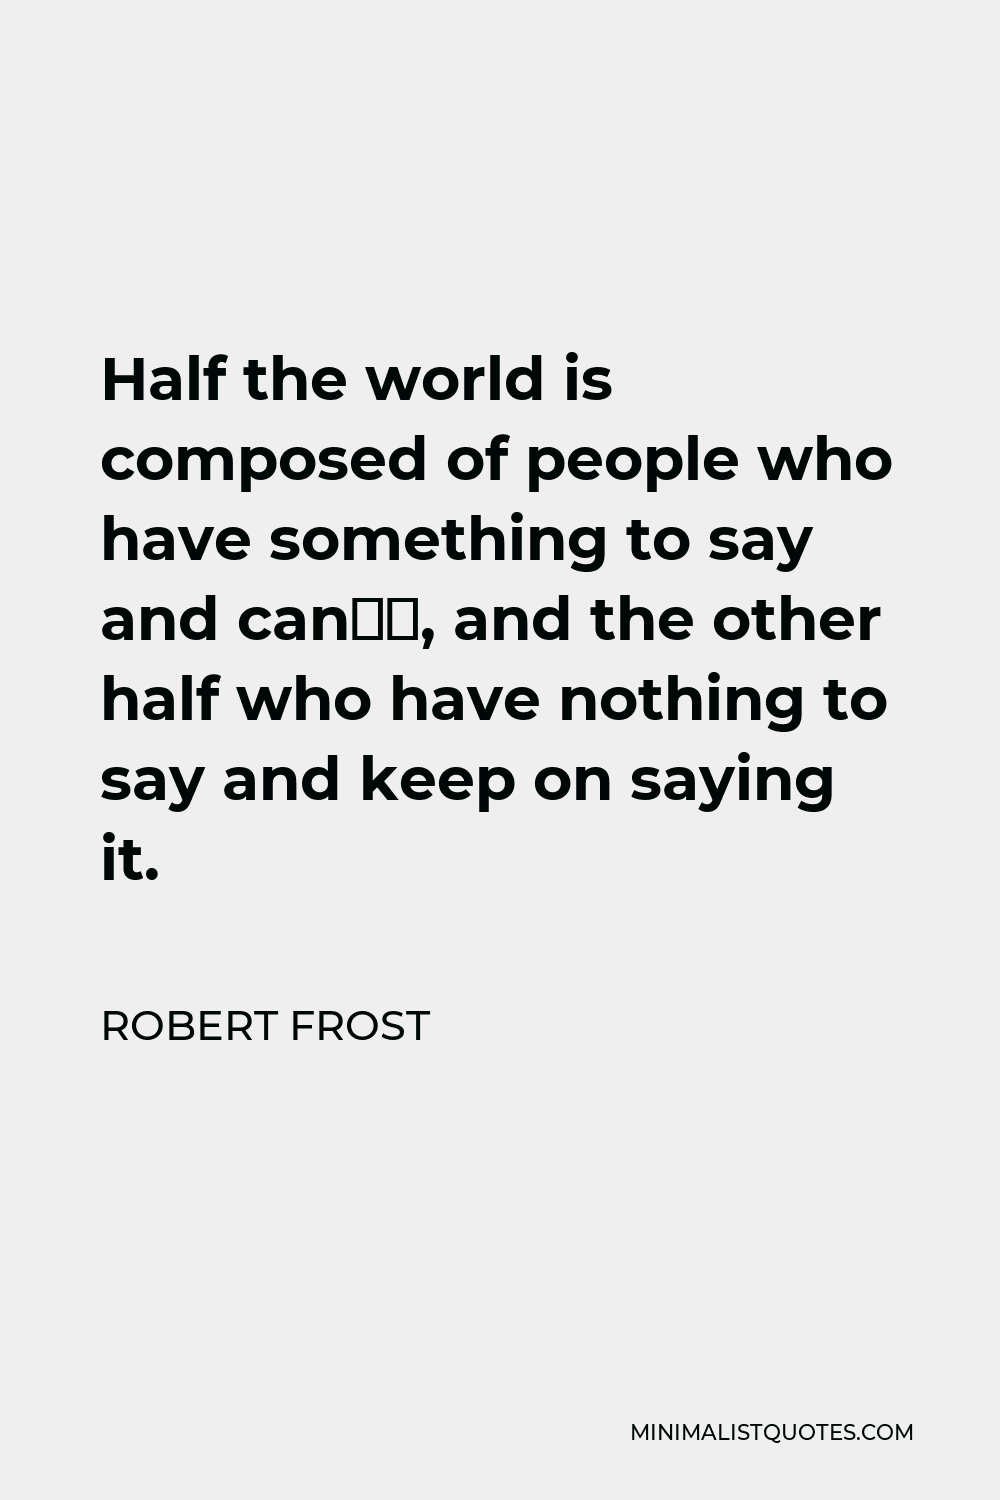 Robert Frost Quote - Half the world is composed of people who have something to say and can’t, and the other half who have nothing to say and keep on saying it.